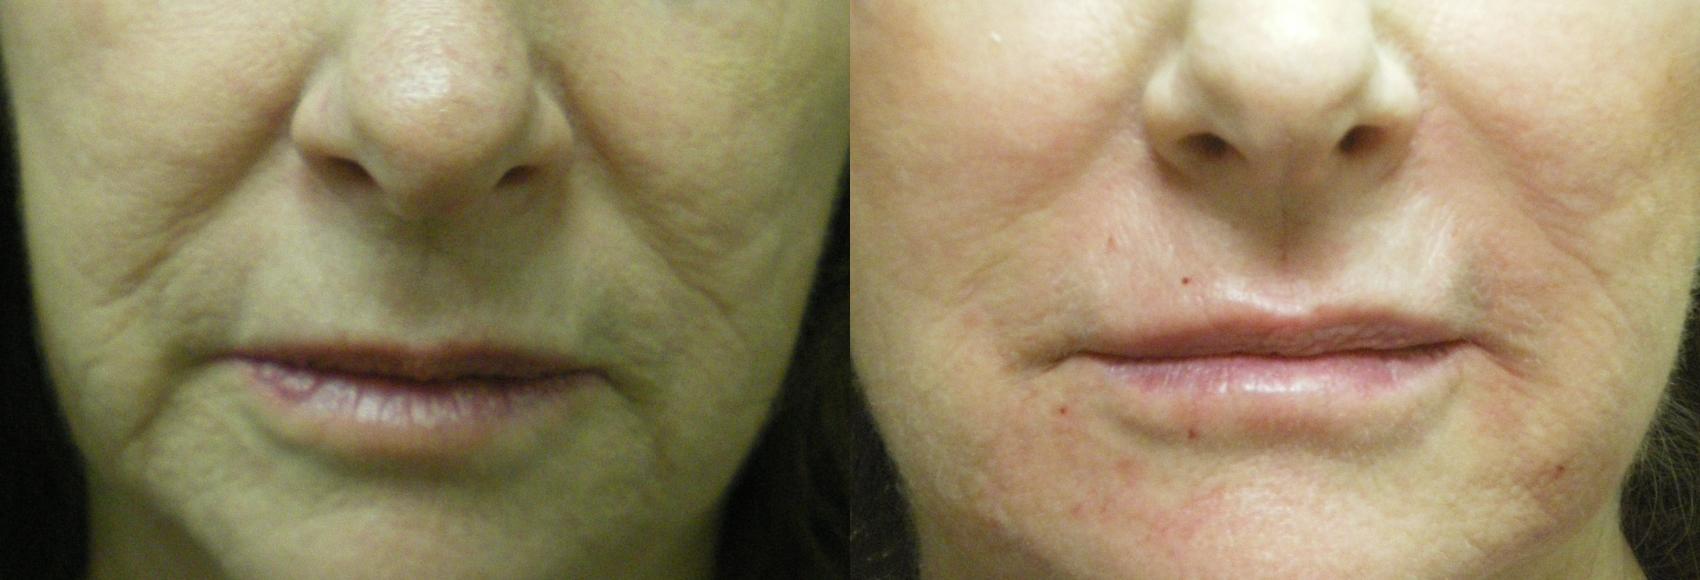 Dermal Fillers Before & After Photo | Atlanta, GA | Plastic Surgery Center of the South